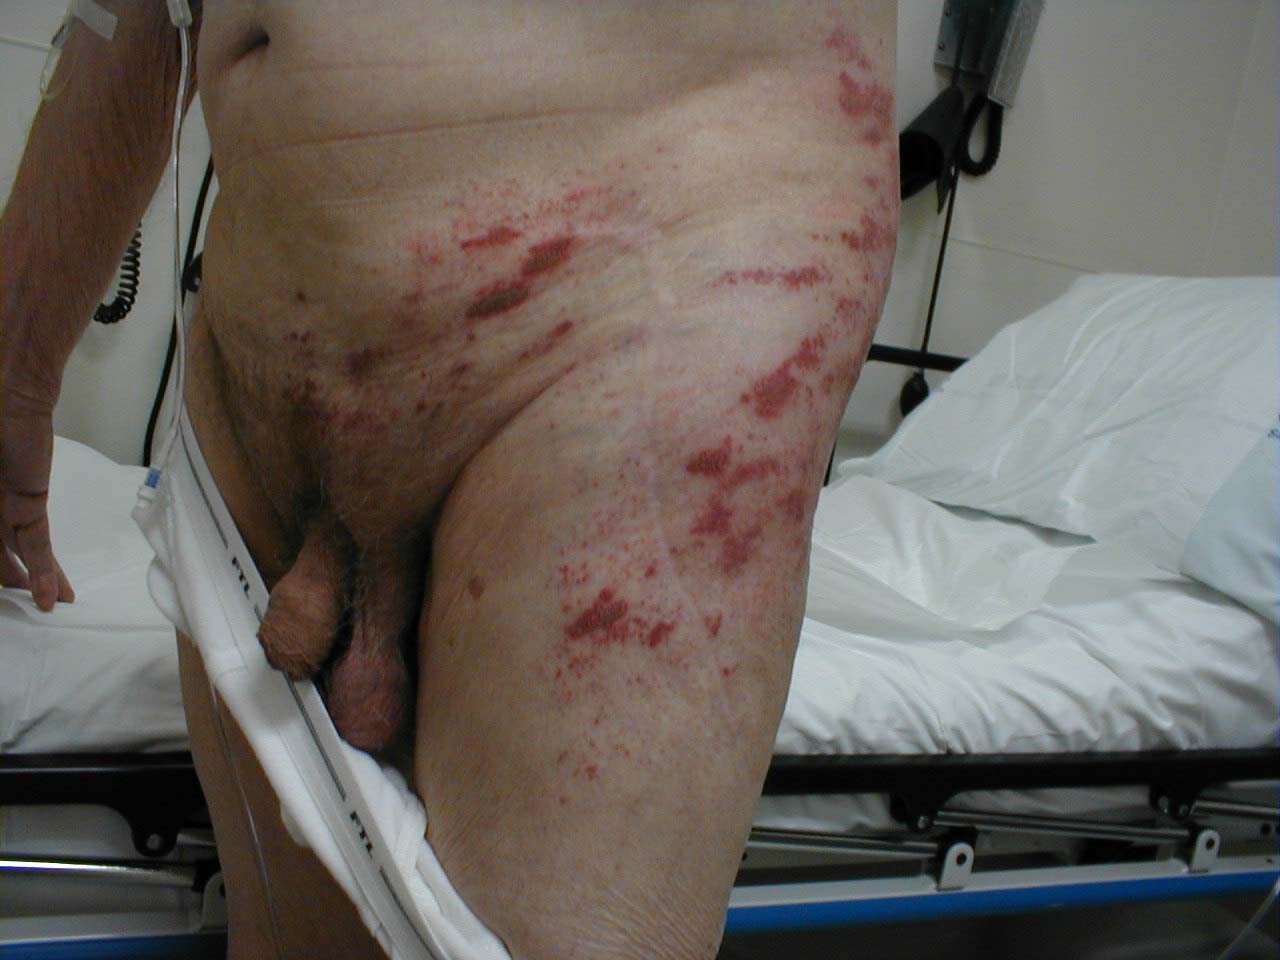 Herpes Zoster: Dermatomally distributed vesicles, many of which have coalesced, in patient with HZV infection.